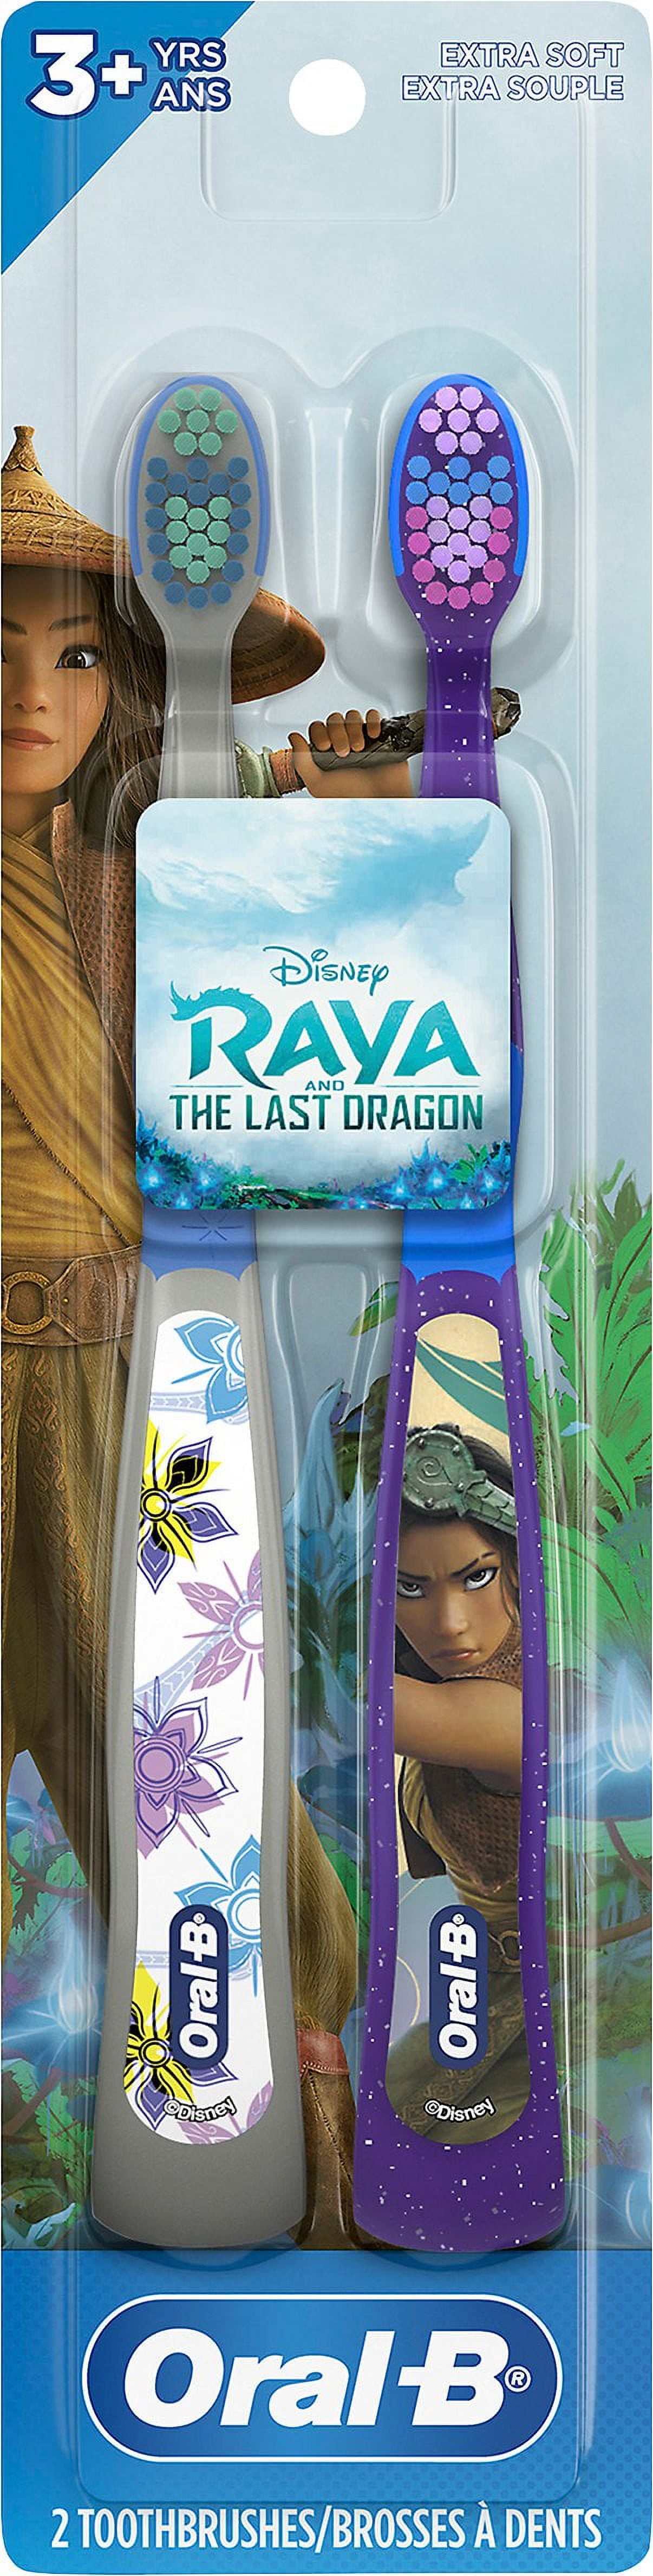 Oral-B Kids Extra Soft Manual Toothbrush Featuring Disney's Raya and the  Last Dragon - 2ct